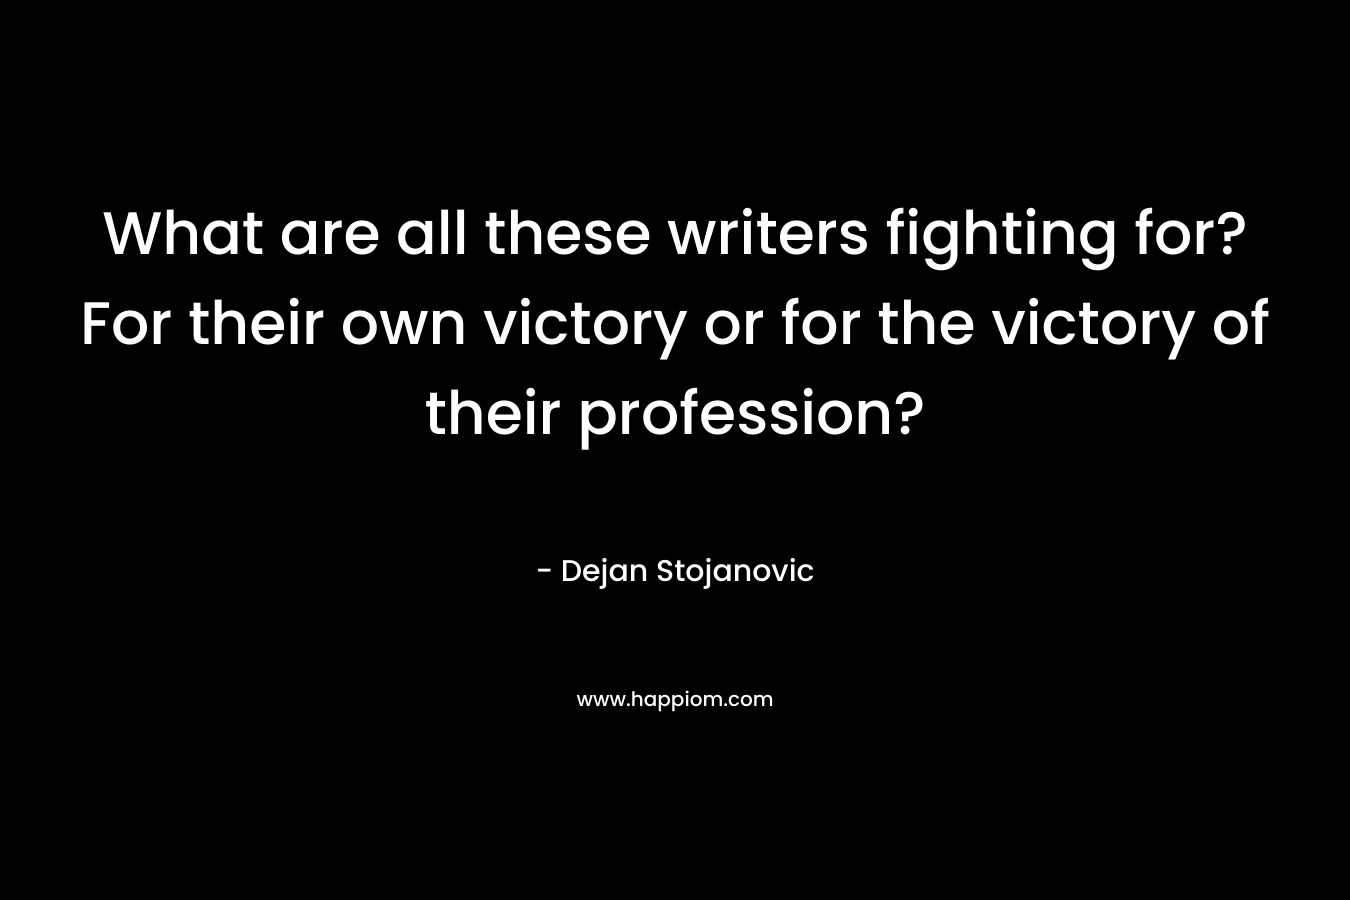 What are all these writers fighting for? For their own victory or for the victory of their profession?